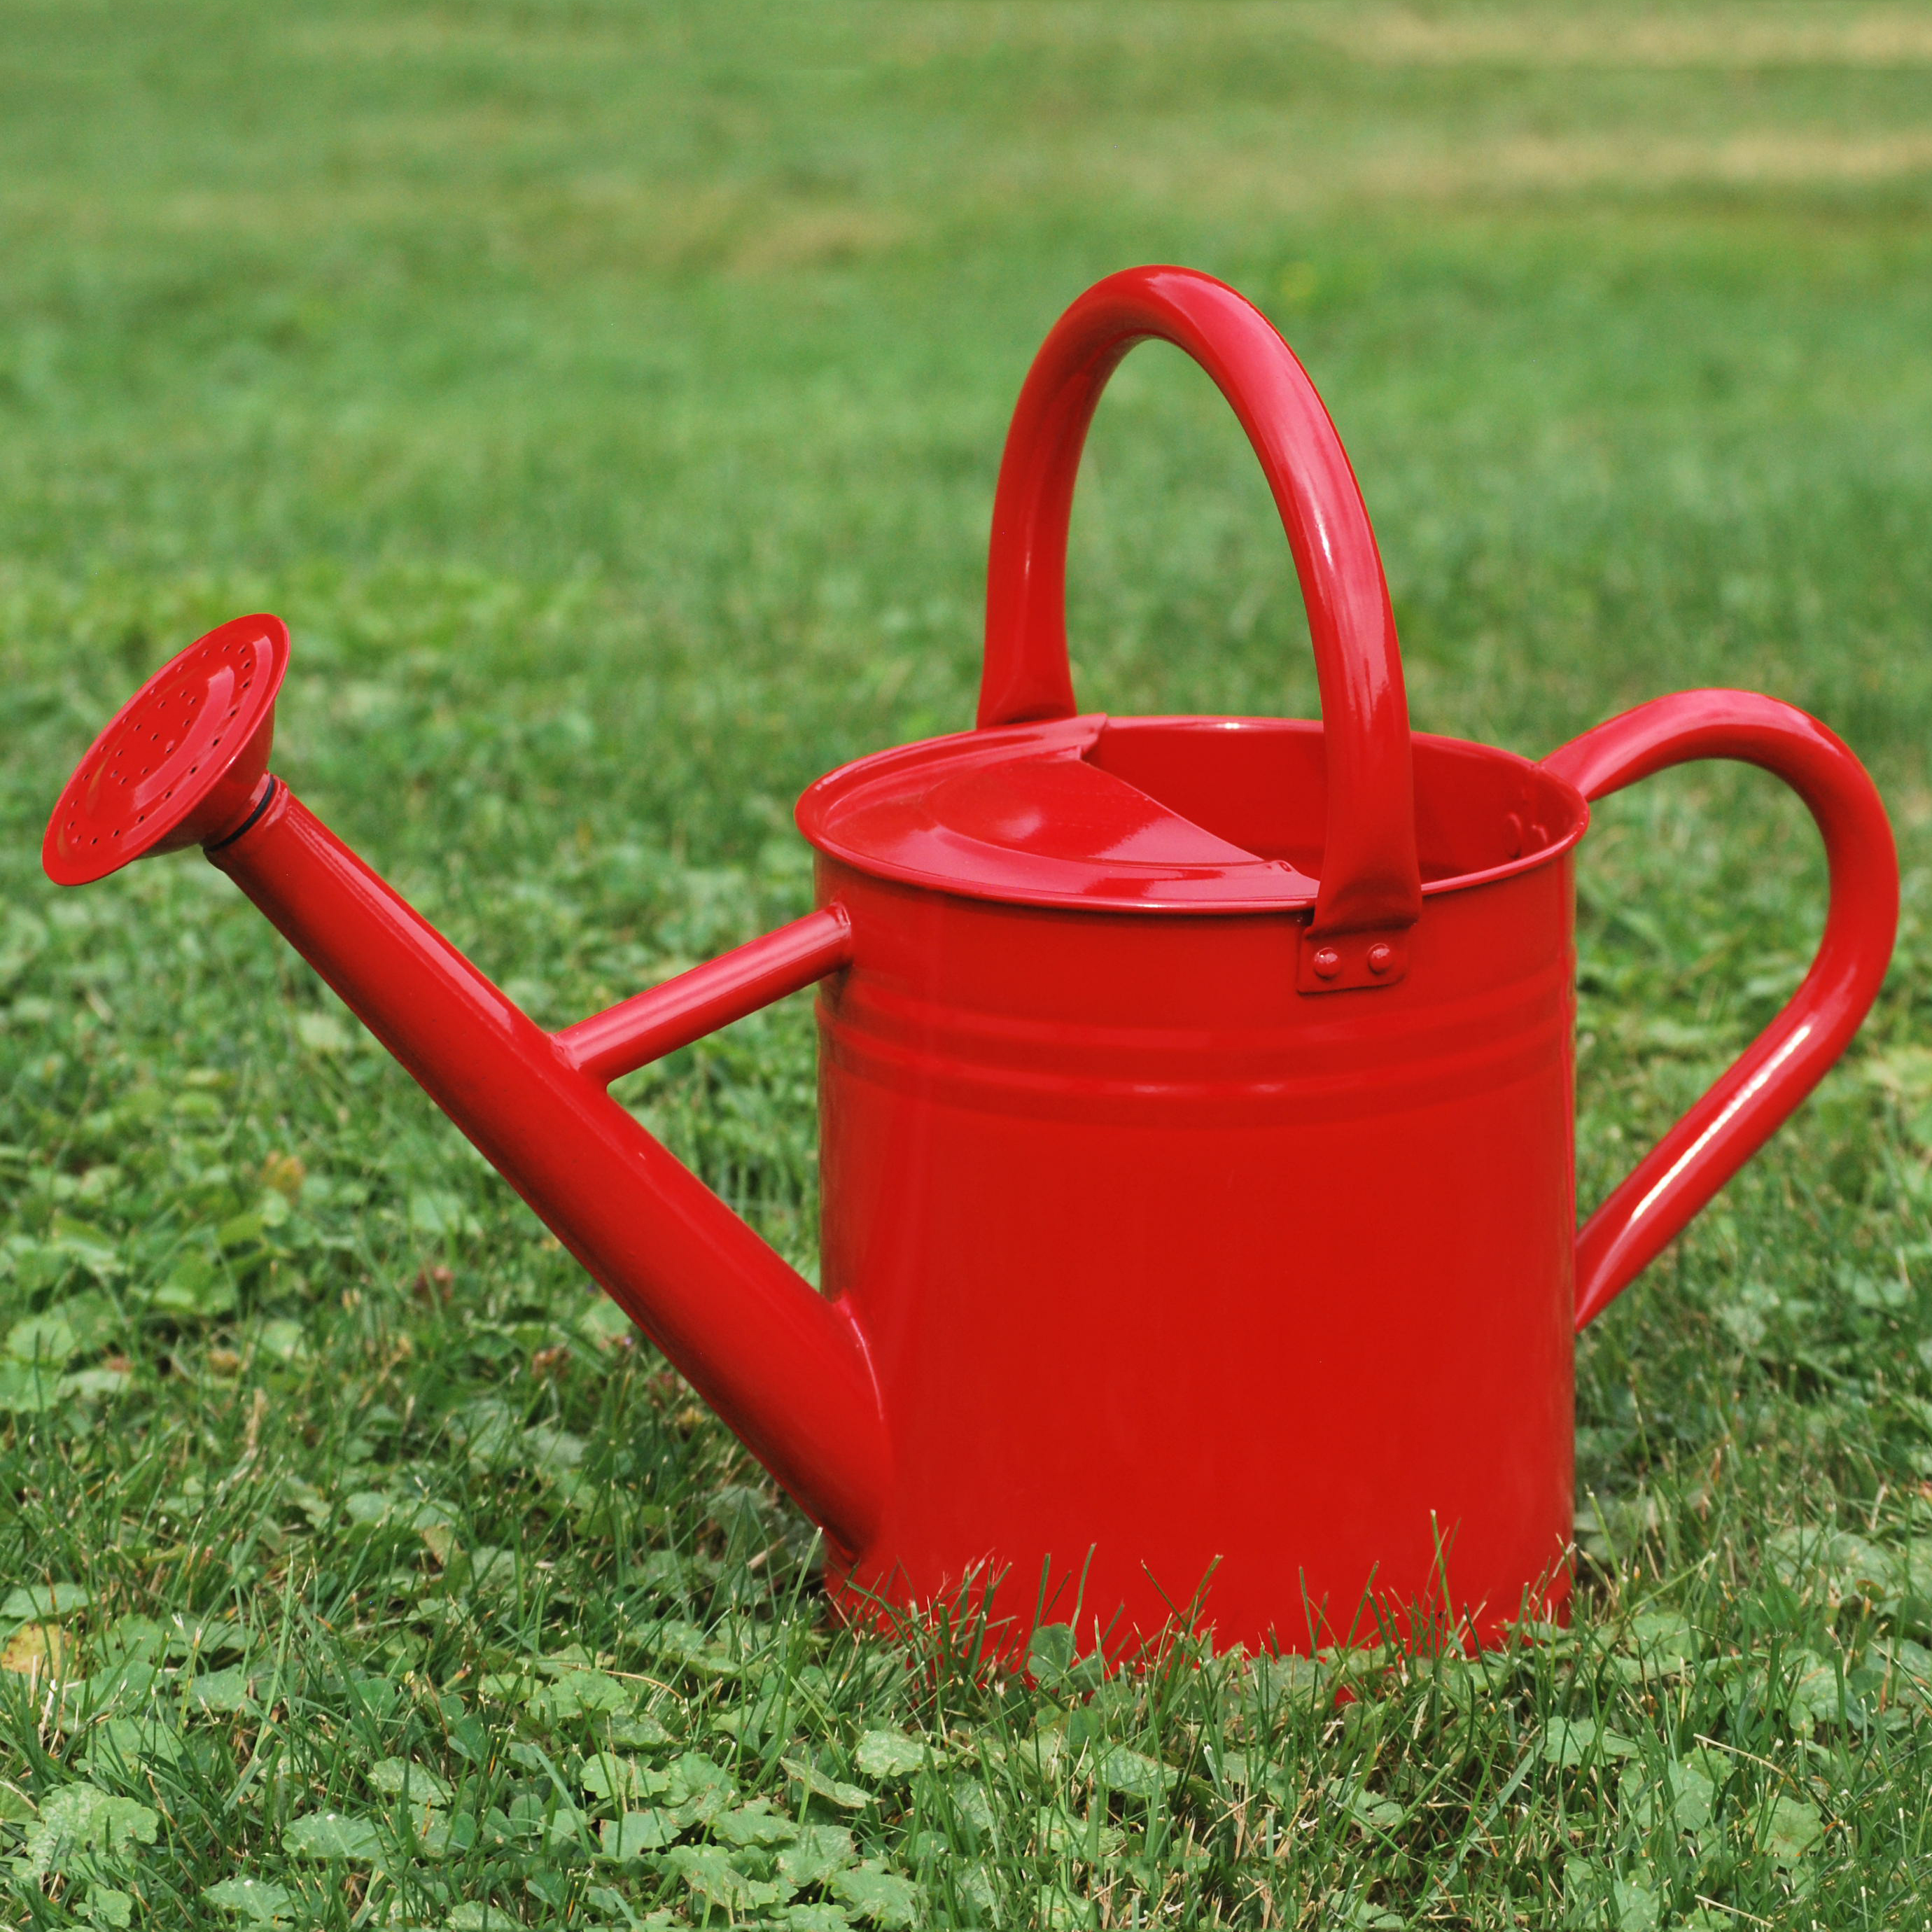 Gardener Select GSAW3005PPR 7-Liter Watering Can, Red